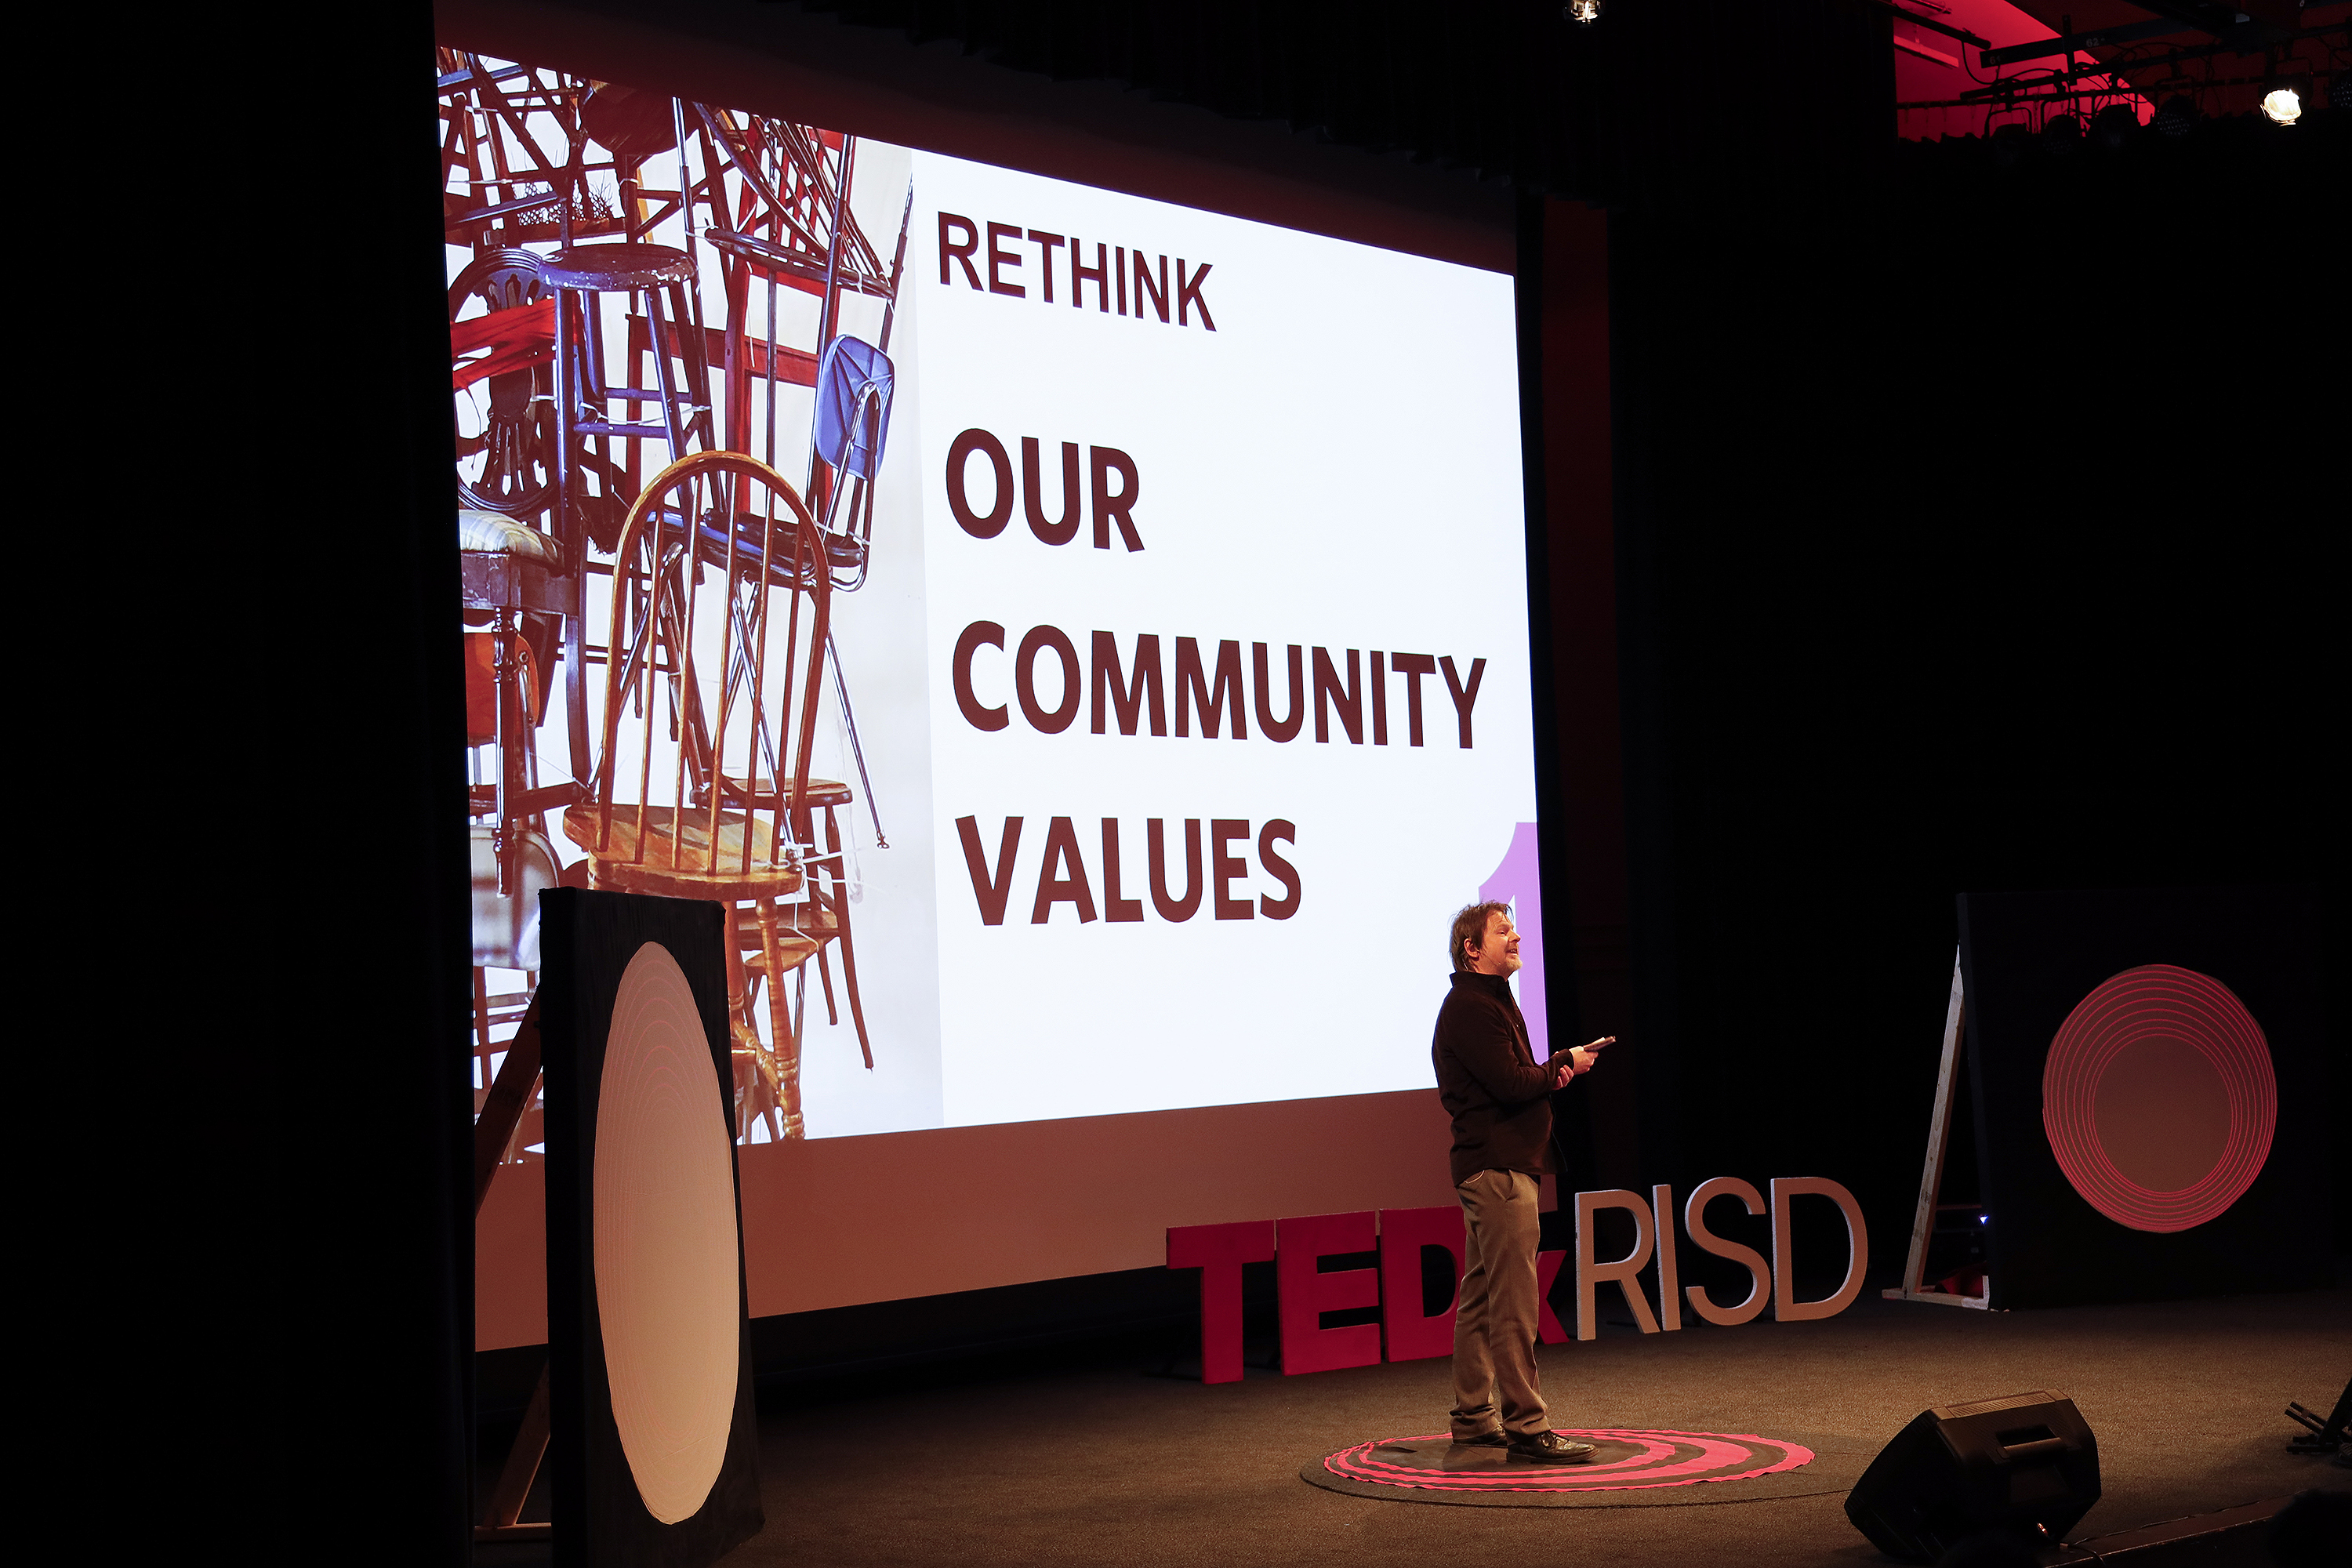 speaker Markus Berger encourages the audience to rethink community values